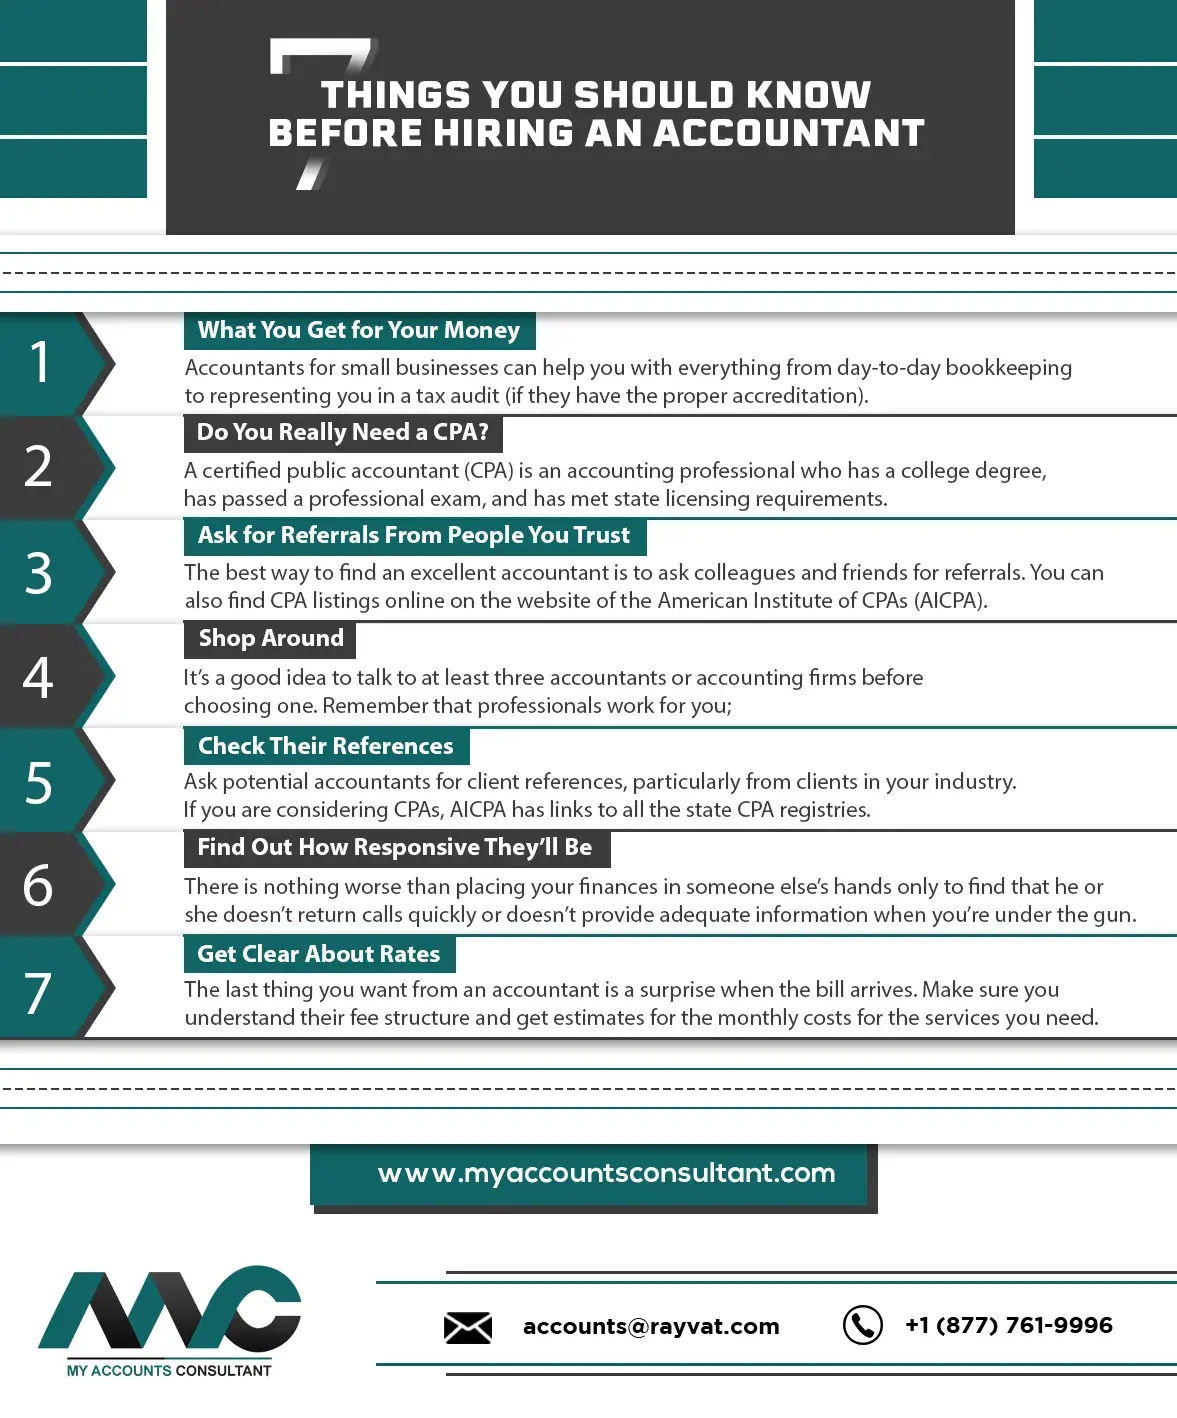 Things You Should Know Before Hiring An Accountant